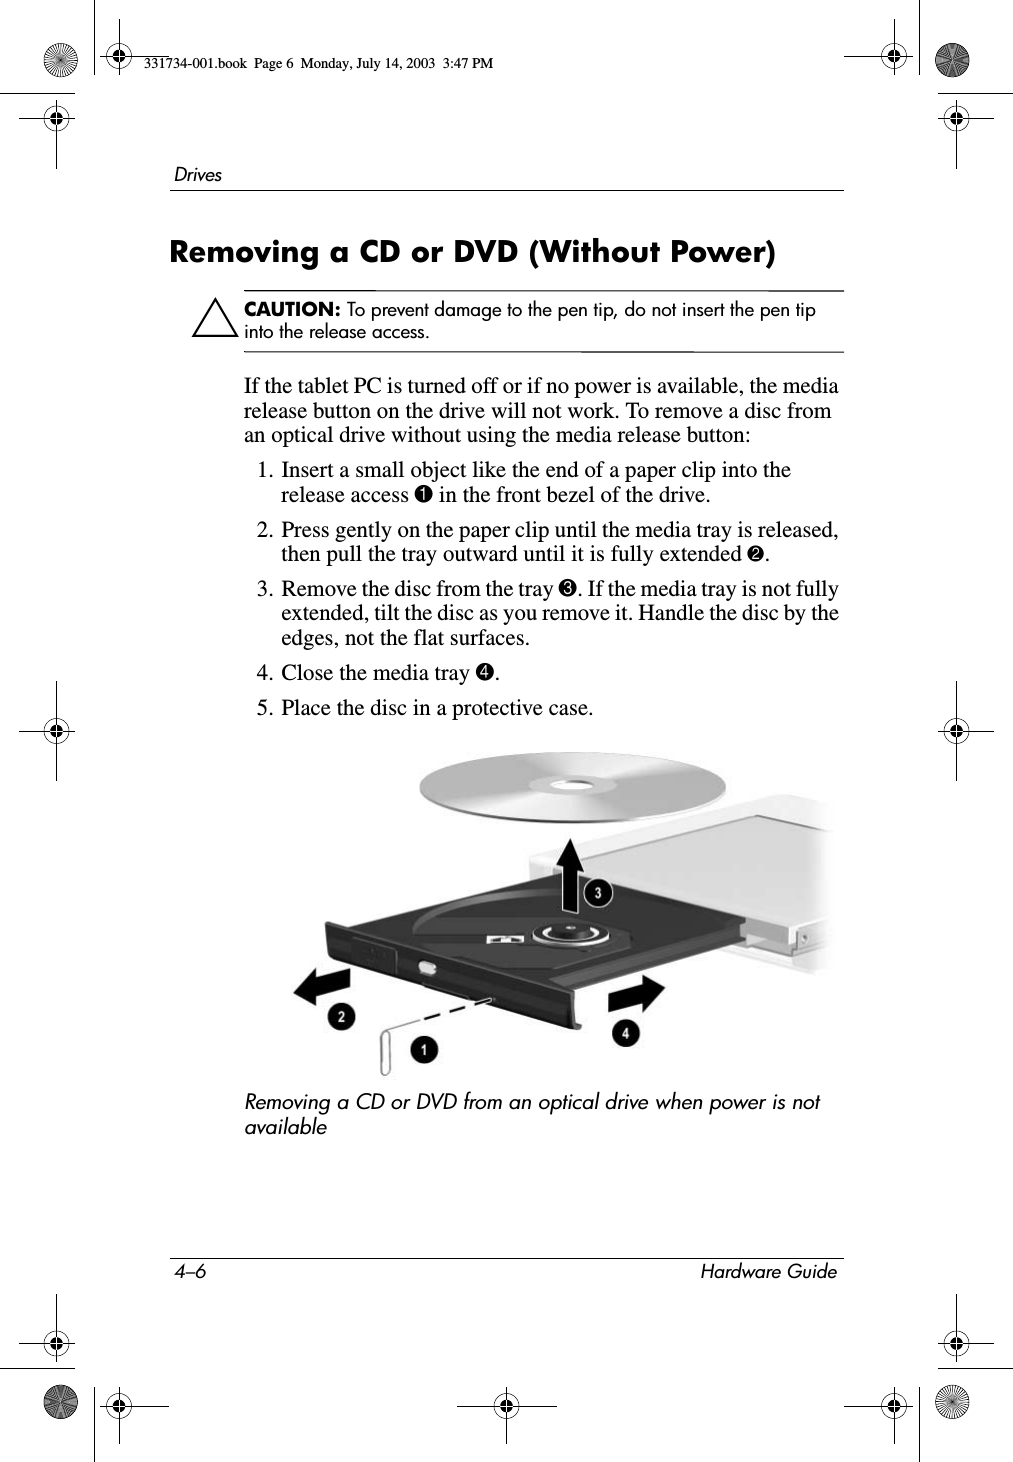 4–6 Hardware GuideDrivesRemoving a CD or DVD (Without Power)ÄCAUTION: To prevent damage to the pen tip, do not insert the pen tip into the release access.If the tablet PC is turned off or if no power is available, the media release button on the drive will not work. To remove a disc from an optical drive without using the media release button:1. Insert a small object like the end of a paper clip into the release access 1 in the front bezel of the drive.2. Press gently on the paper clip until the media tray is released, then pull the tray outward until it is fully extended 2.3. Remove the disc from the tray 3. If the media tray is not fully extended, tilt the disc as you remove it. Handle the disc by the edges, not the flat surfaces.4. Close the media tray 4.5. Place the disc in a protective case.Removing a CD or DVD from an optical drive when power is not available331734-001.book  Page 6  Monday, July 14, 2003  3:47 PM